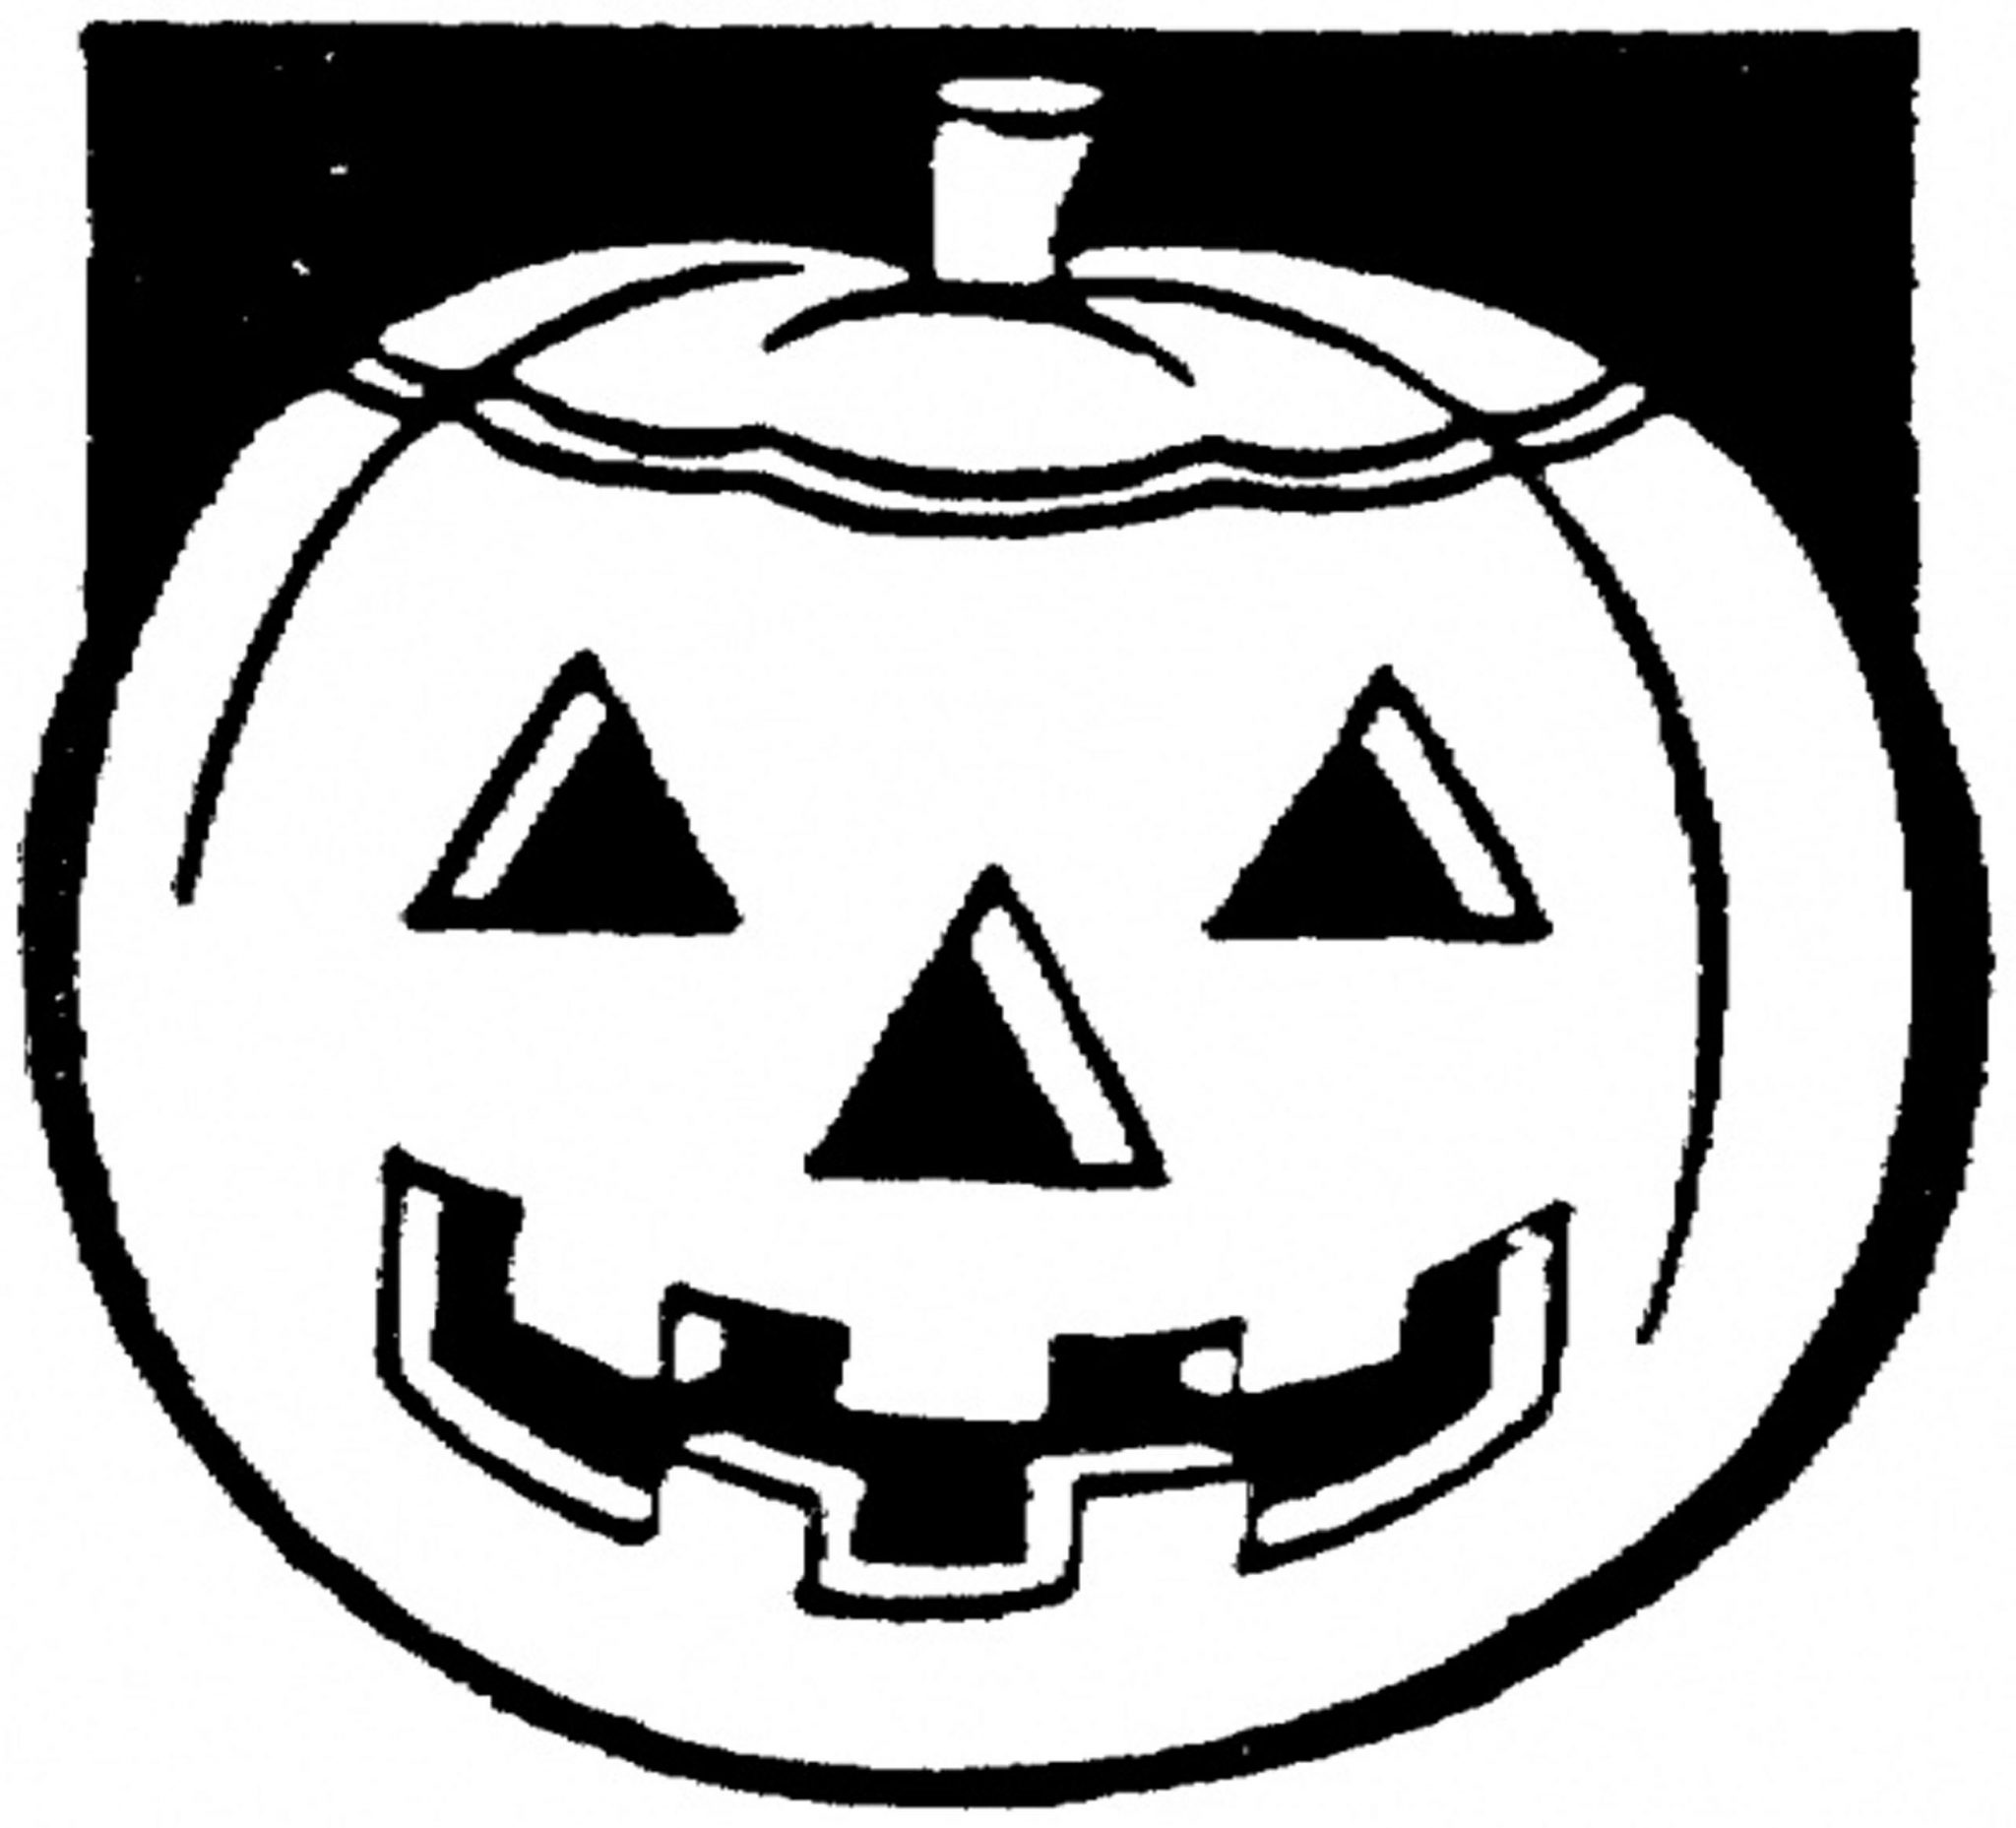 Halloween Coloring Pages Pumpkin